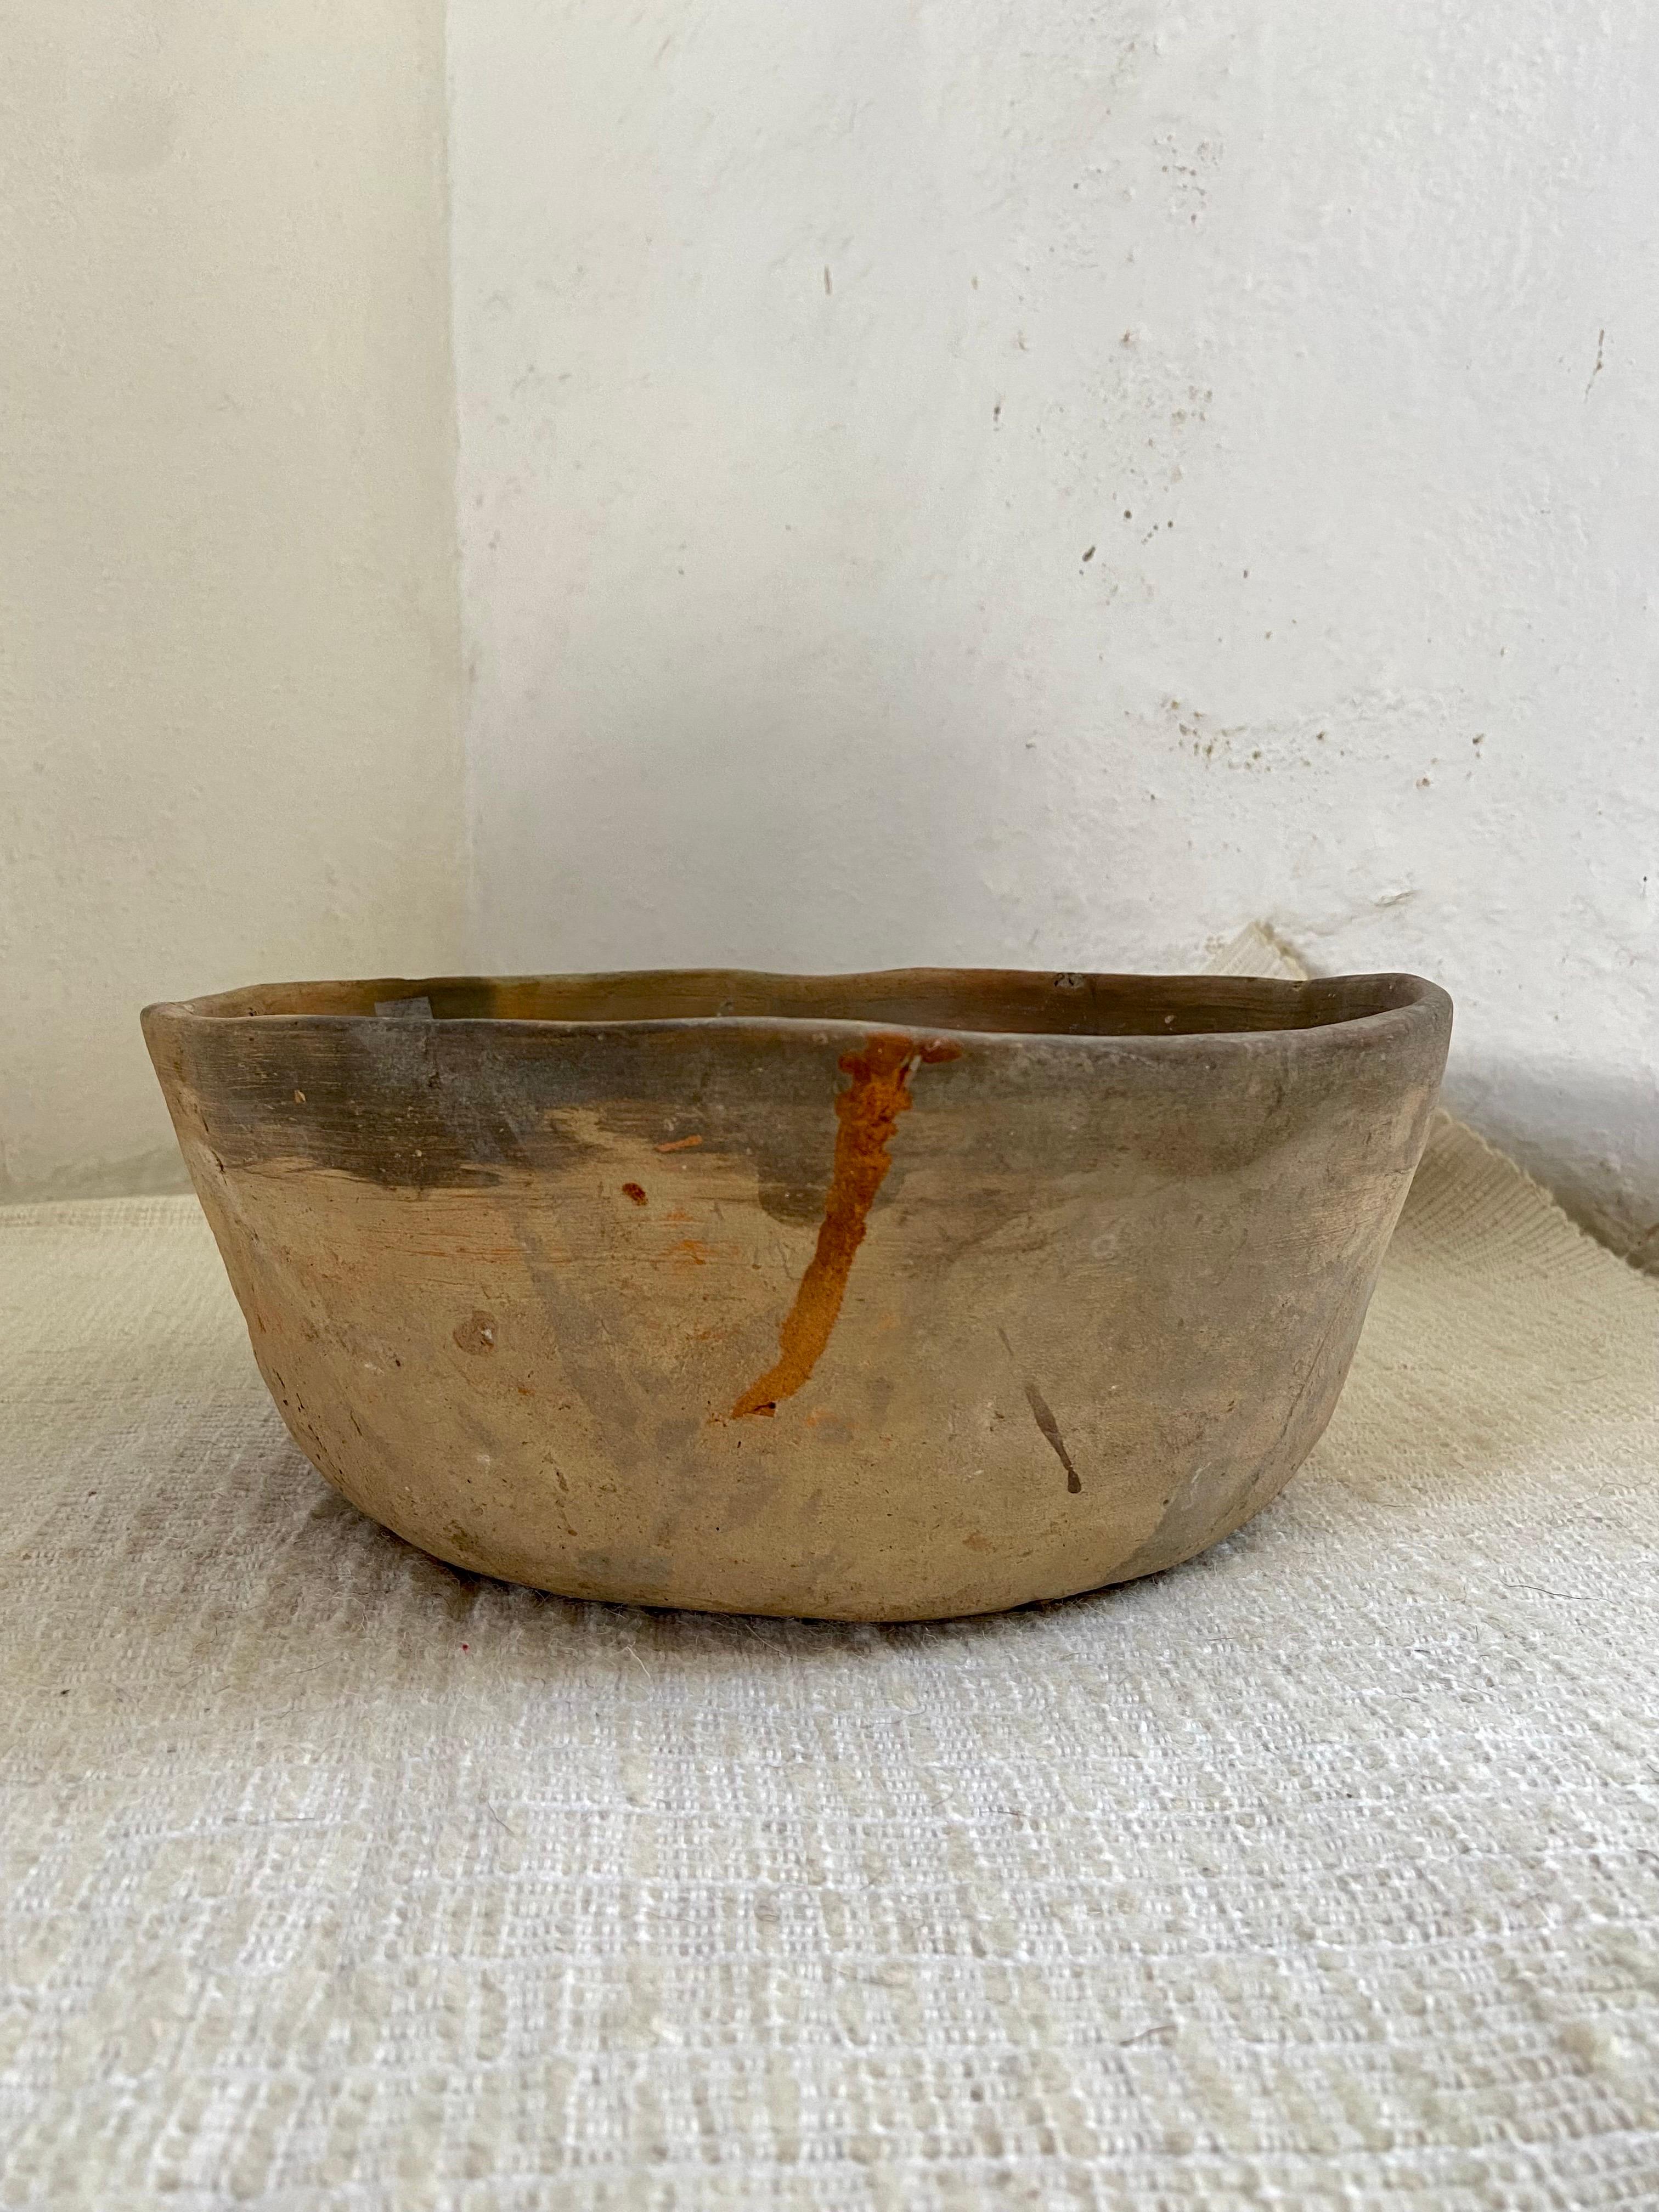 Fired Mid-20th Century Terracotta Bowl from Mexico